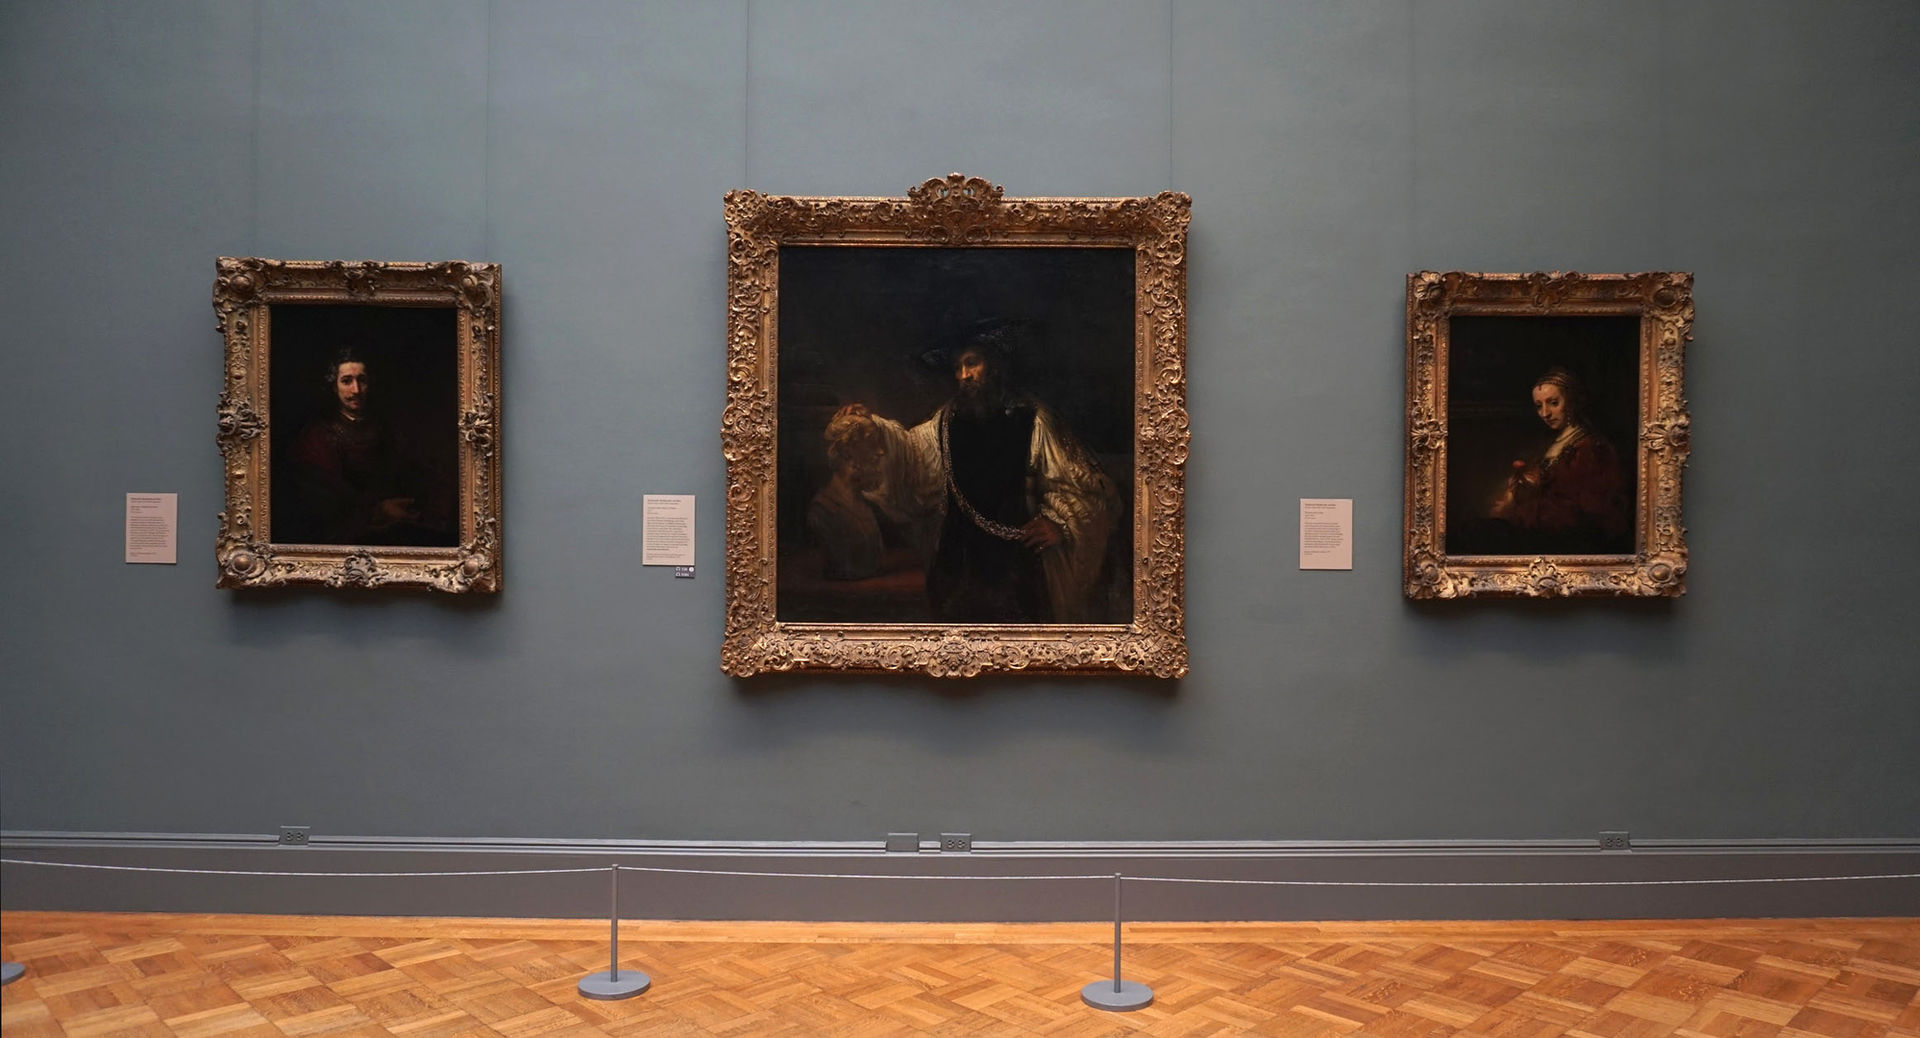 View of a Met gallery wall showing three masterpiece paintings by Rembrandt